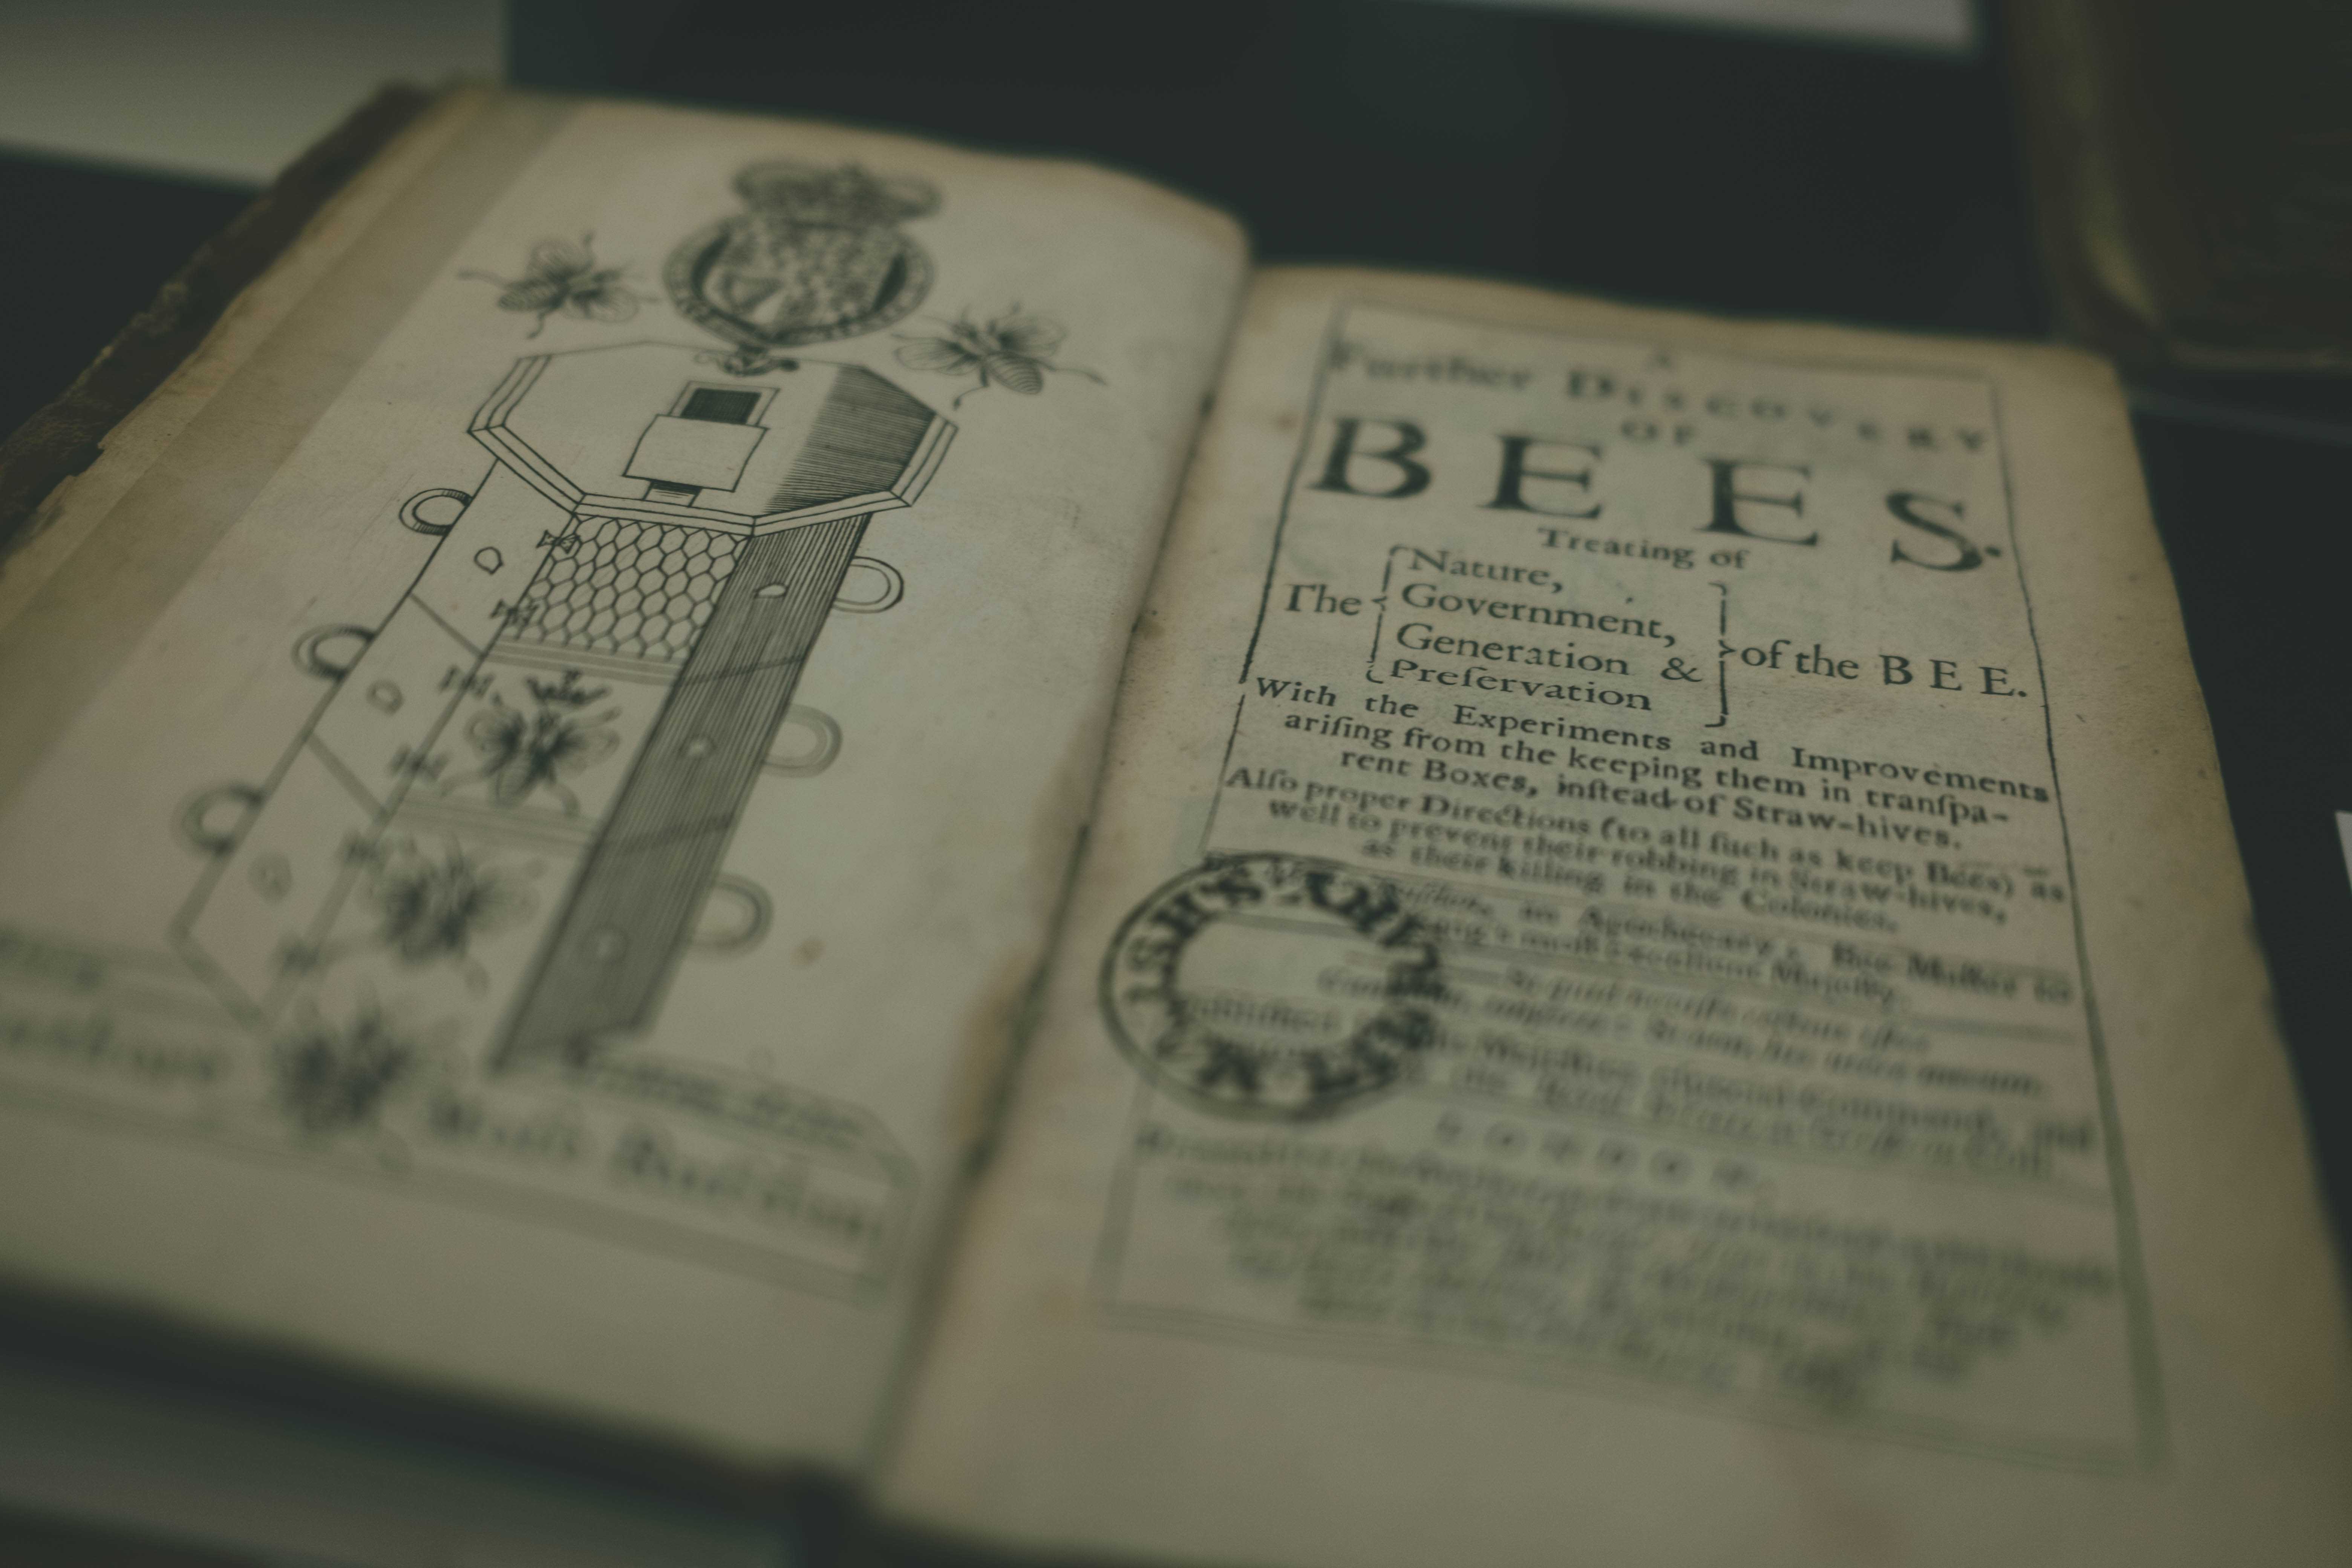 An old book about bees opened to a depiction of a beehive